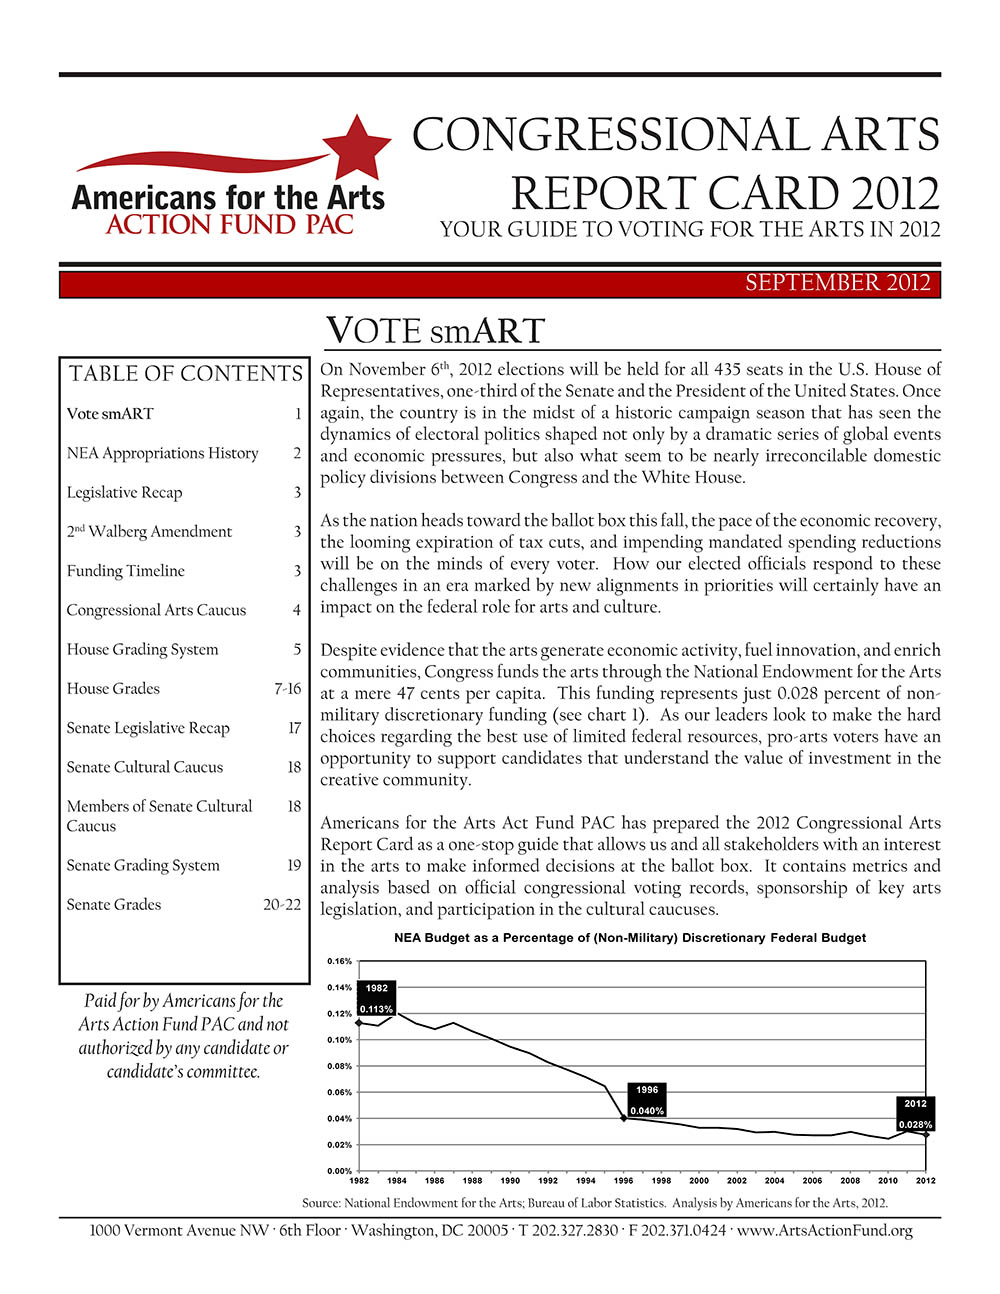 Cover of 2012 Congressional Arts Report Card 